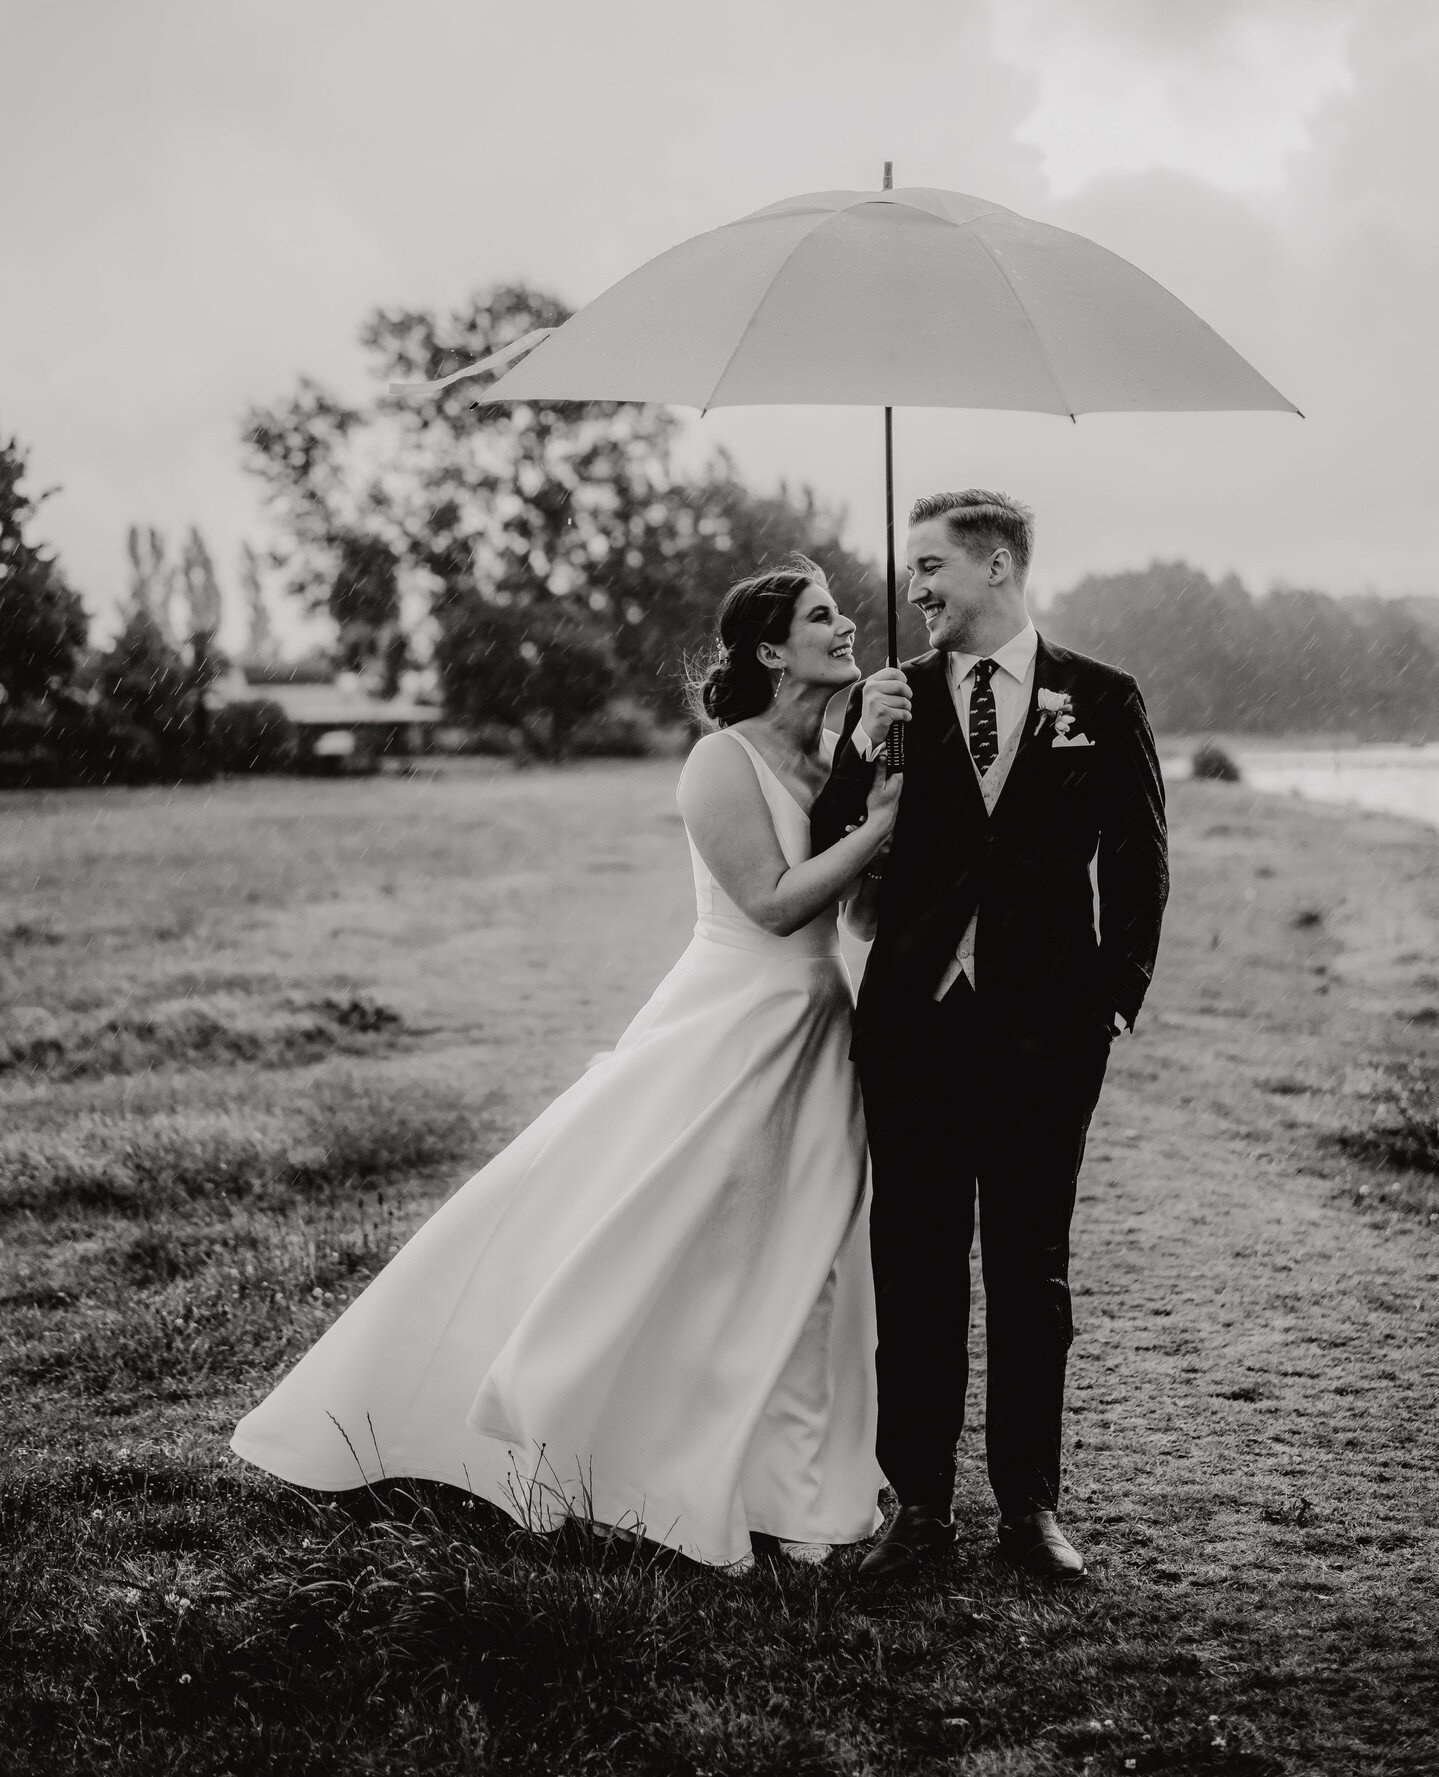 One of my favourite black and white photos of Jared and Alex in the pouring rain 🖤🤍⁠
⁠
#soovertherain #whereisoursummer #springwedding ⁠
#bopweddingphotographer #rotoruawedding #bopweddings #rotoruaweddingphotographer #nzbrideandgroom #nzwed #nzwed